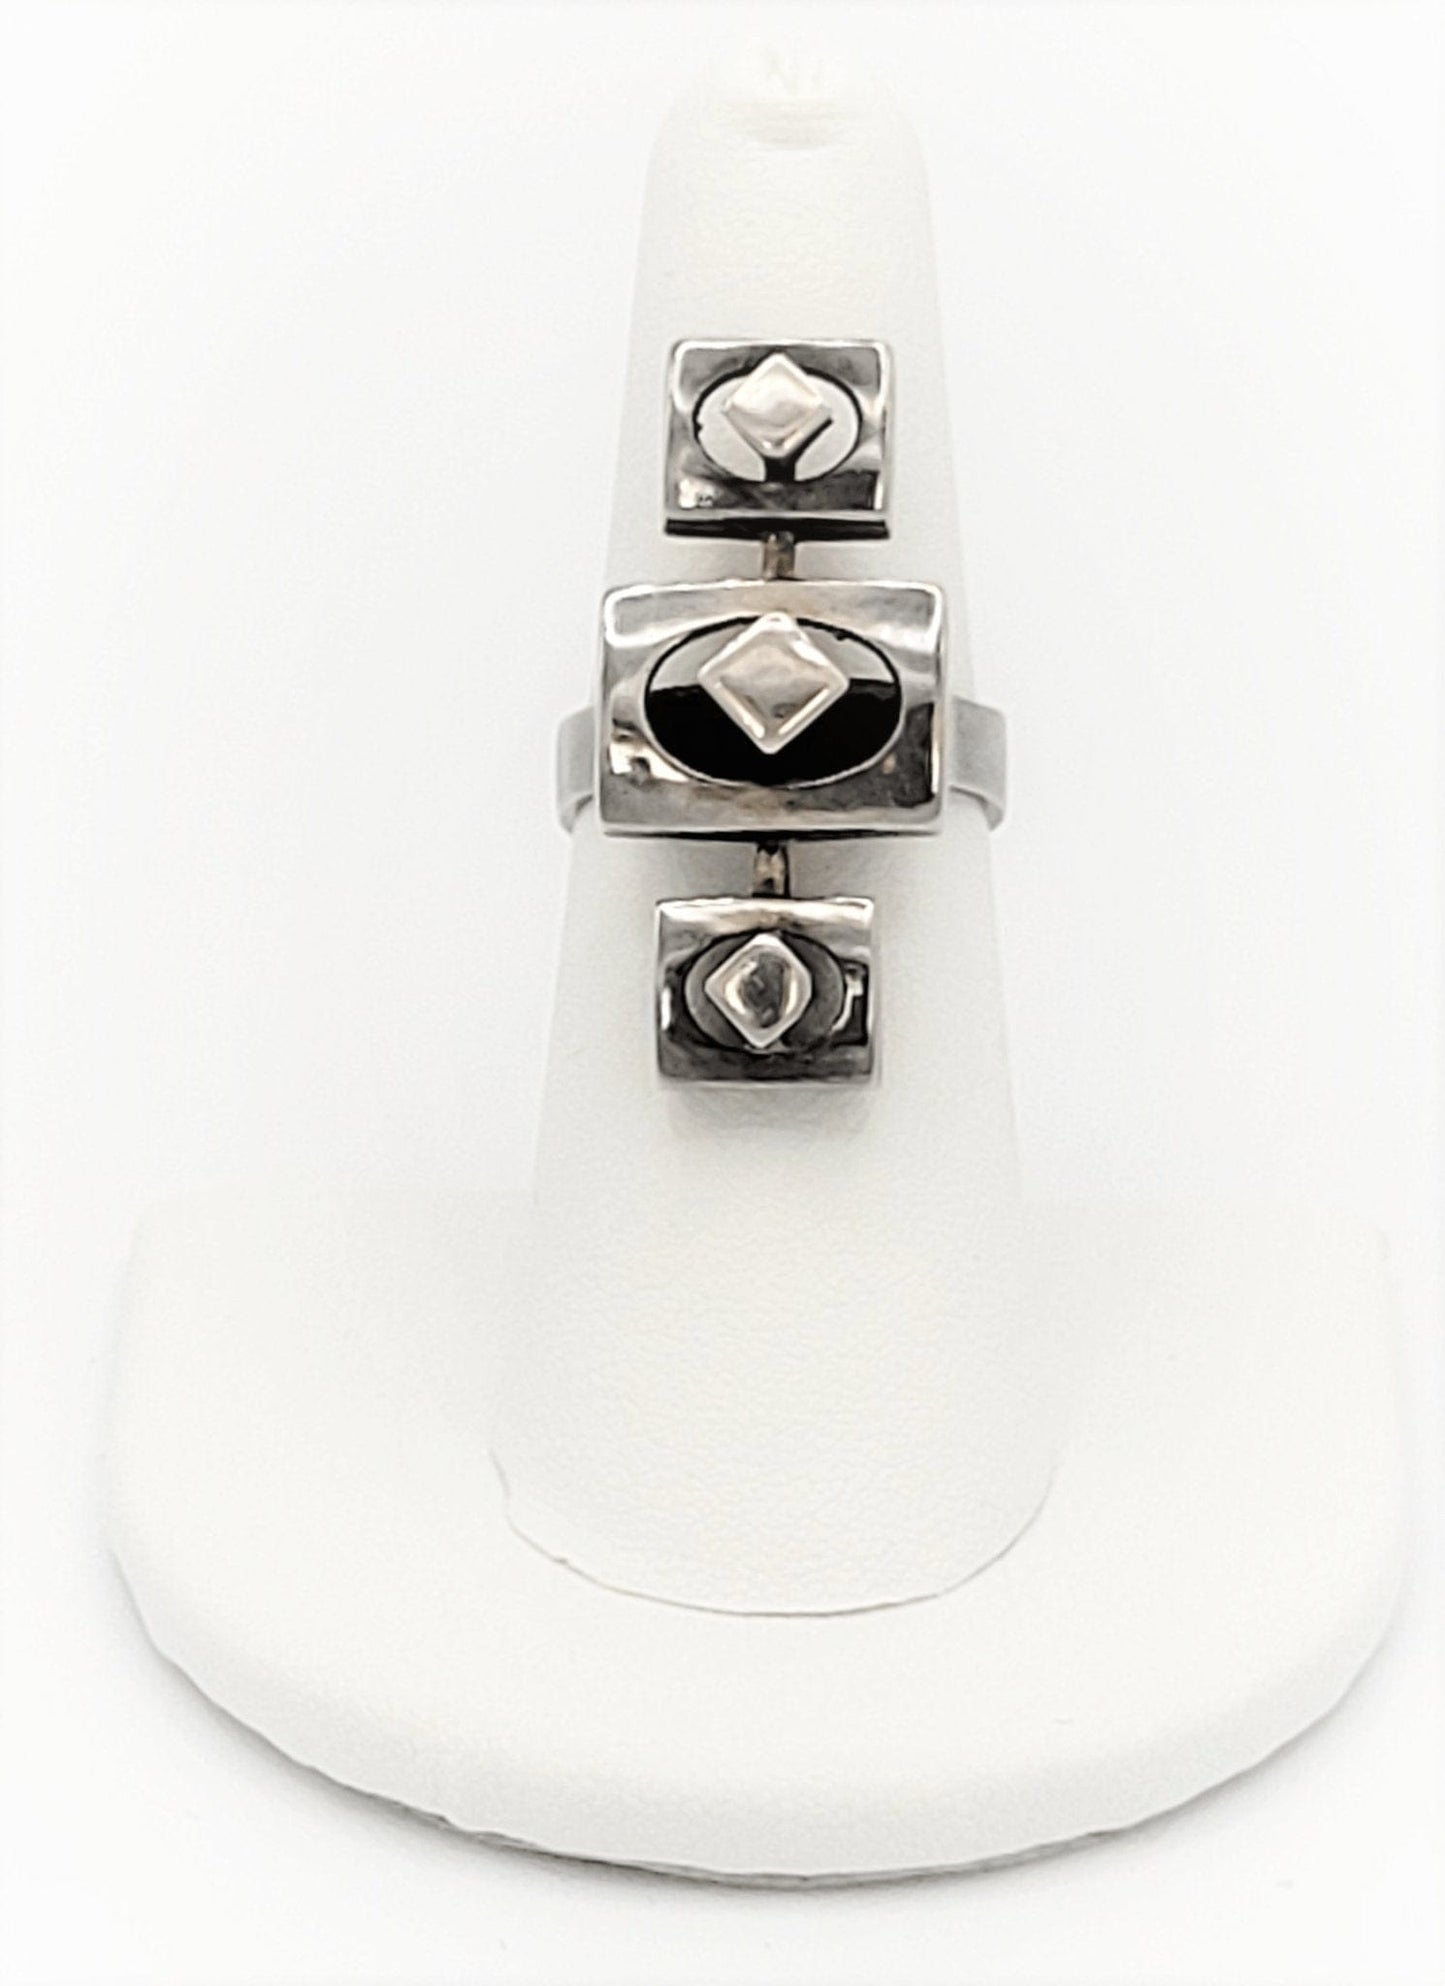 HTS Jewelry Vintage Sterling Silver 3-D Abstract Modernist Geometrical Cocktail Ring - Signed